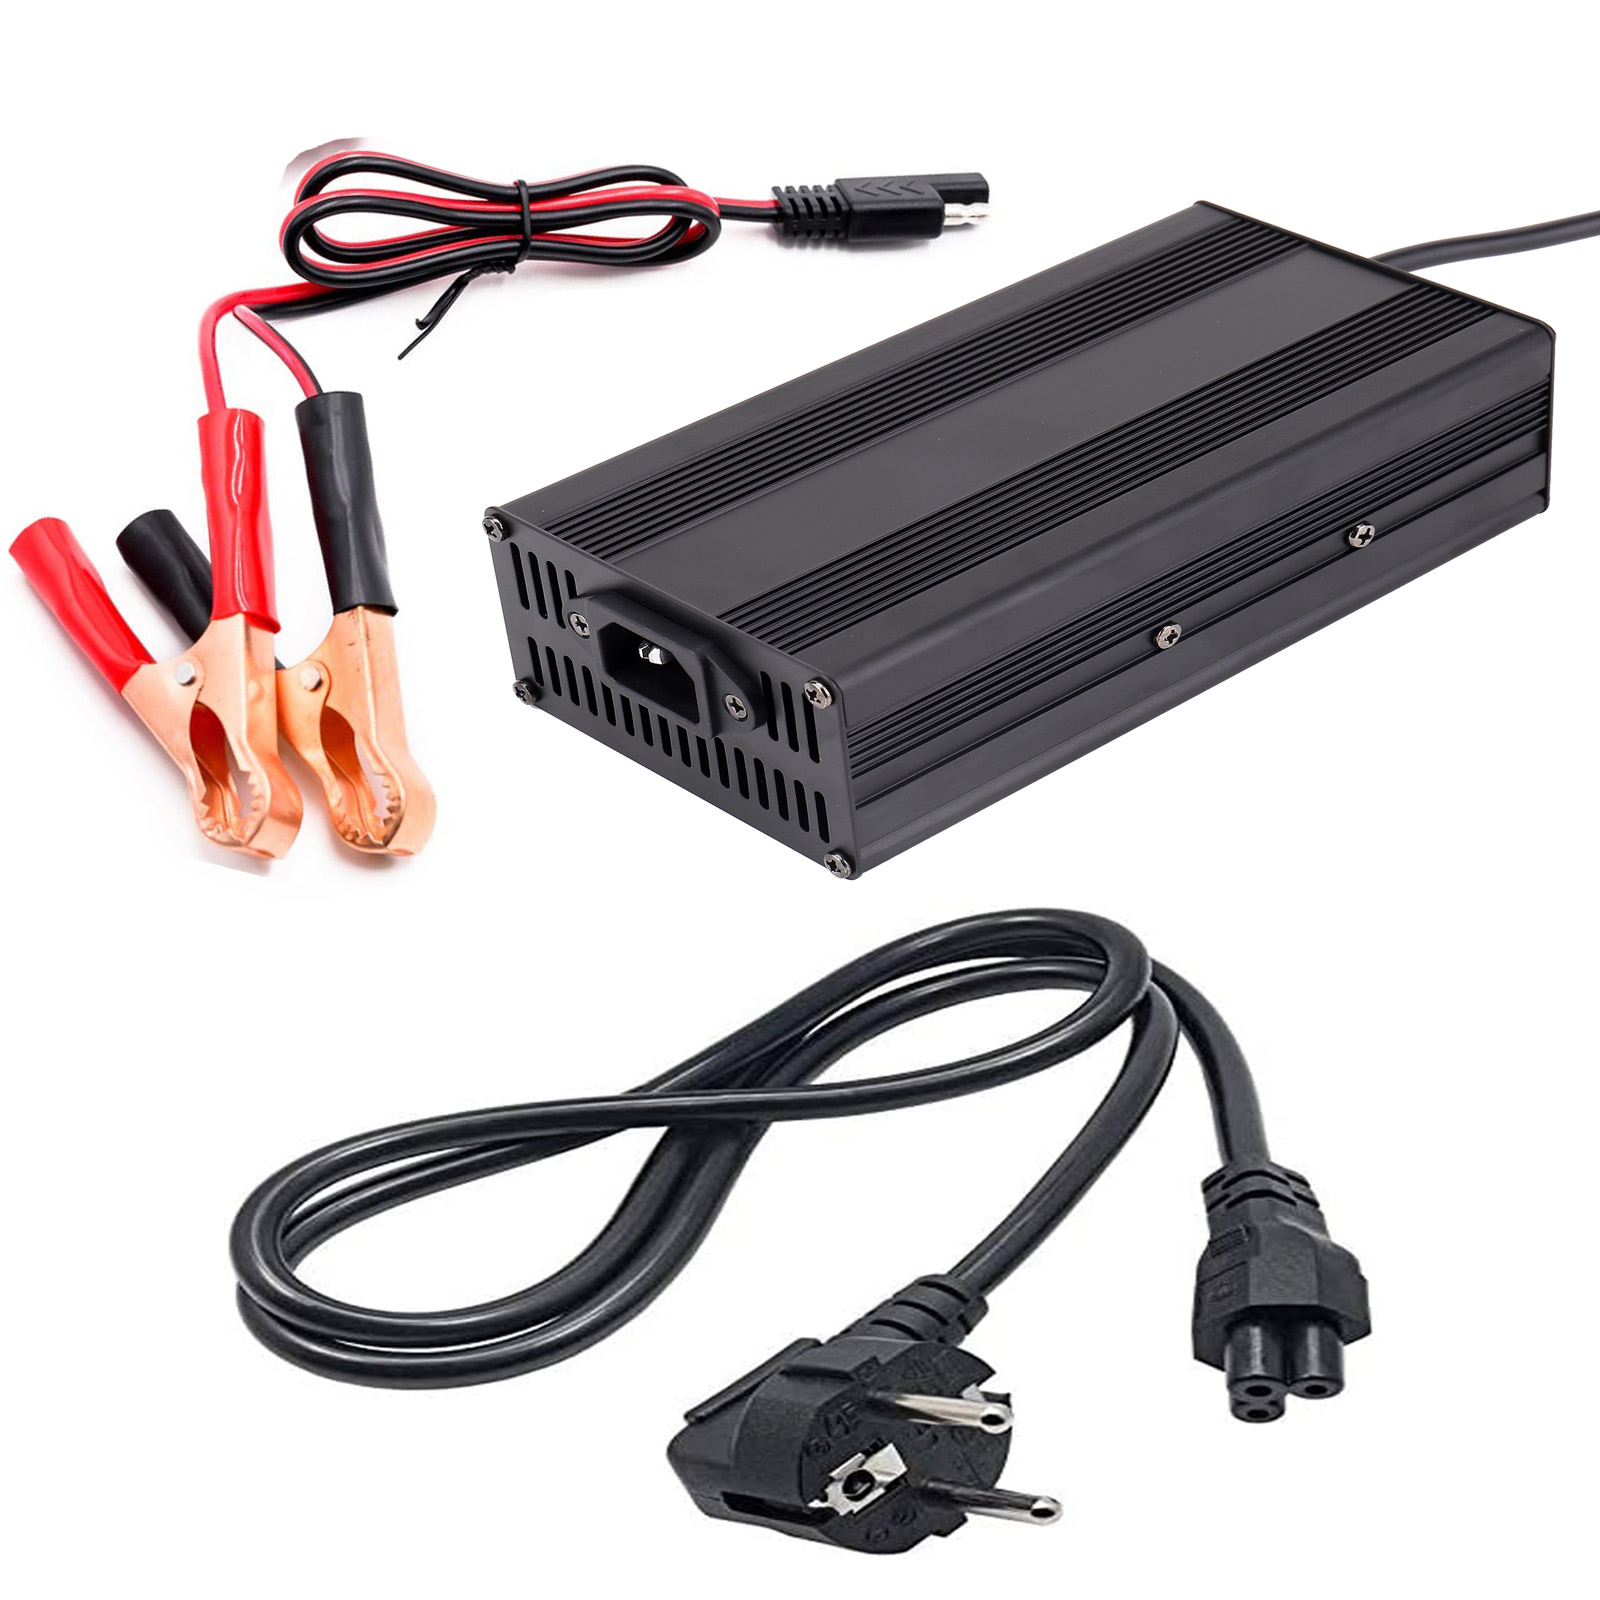 TezePower 14.6V 20A LiFePO4 Lithium Battery Charger